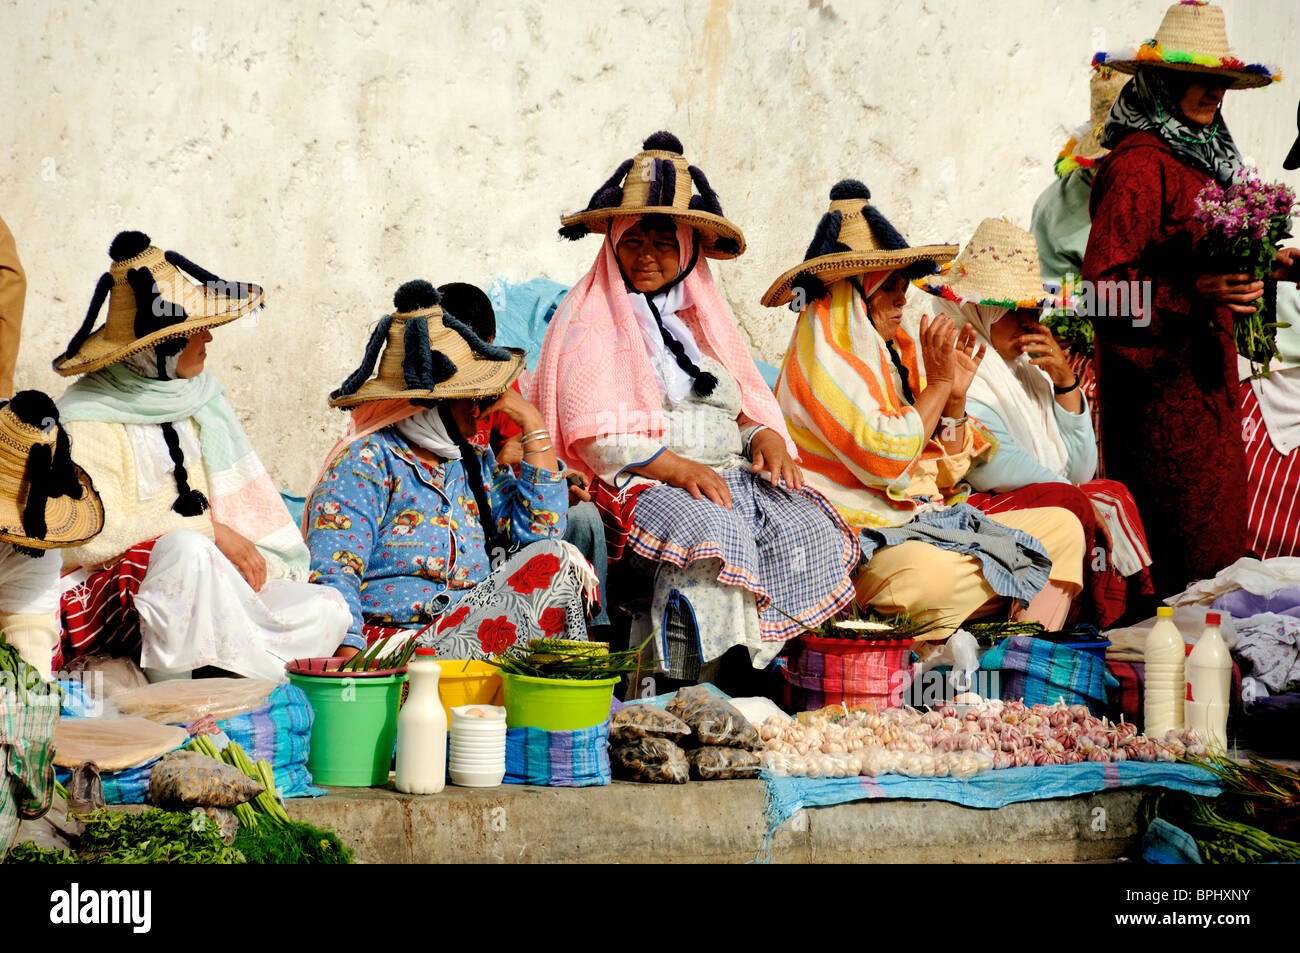 Moroccan Rif Mountain Peasants or Peasant Women at Street Fruit & Vegetable Market, Tangier, Tanger or Tangiers, Morocco Stock Photo